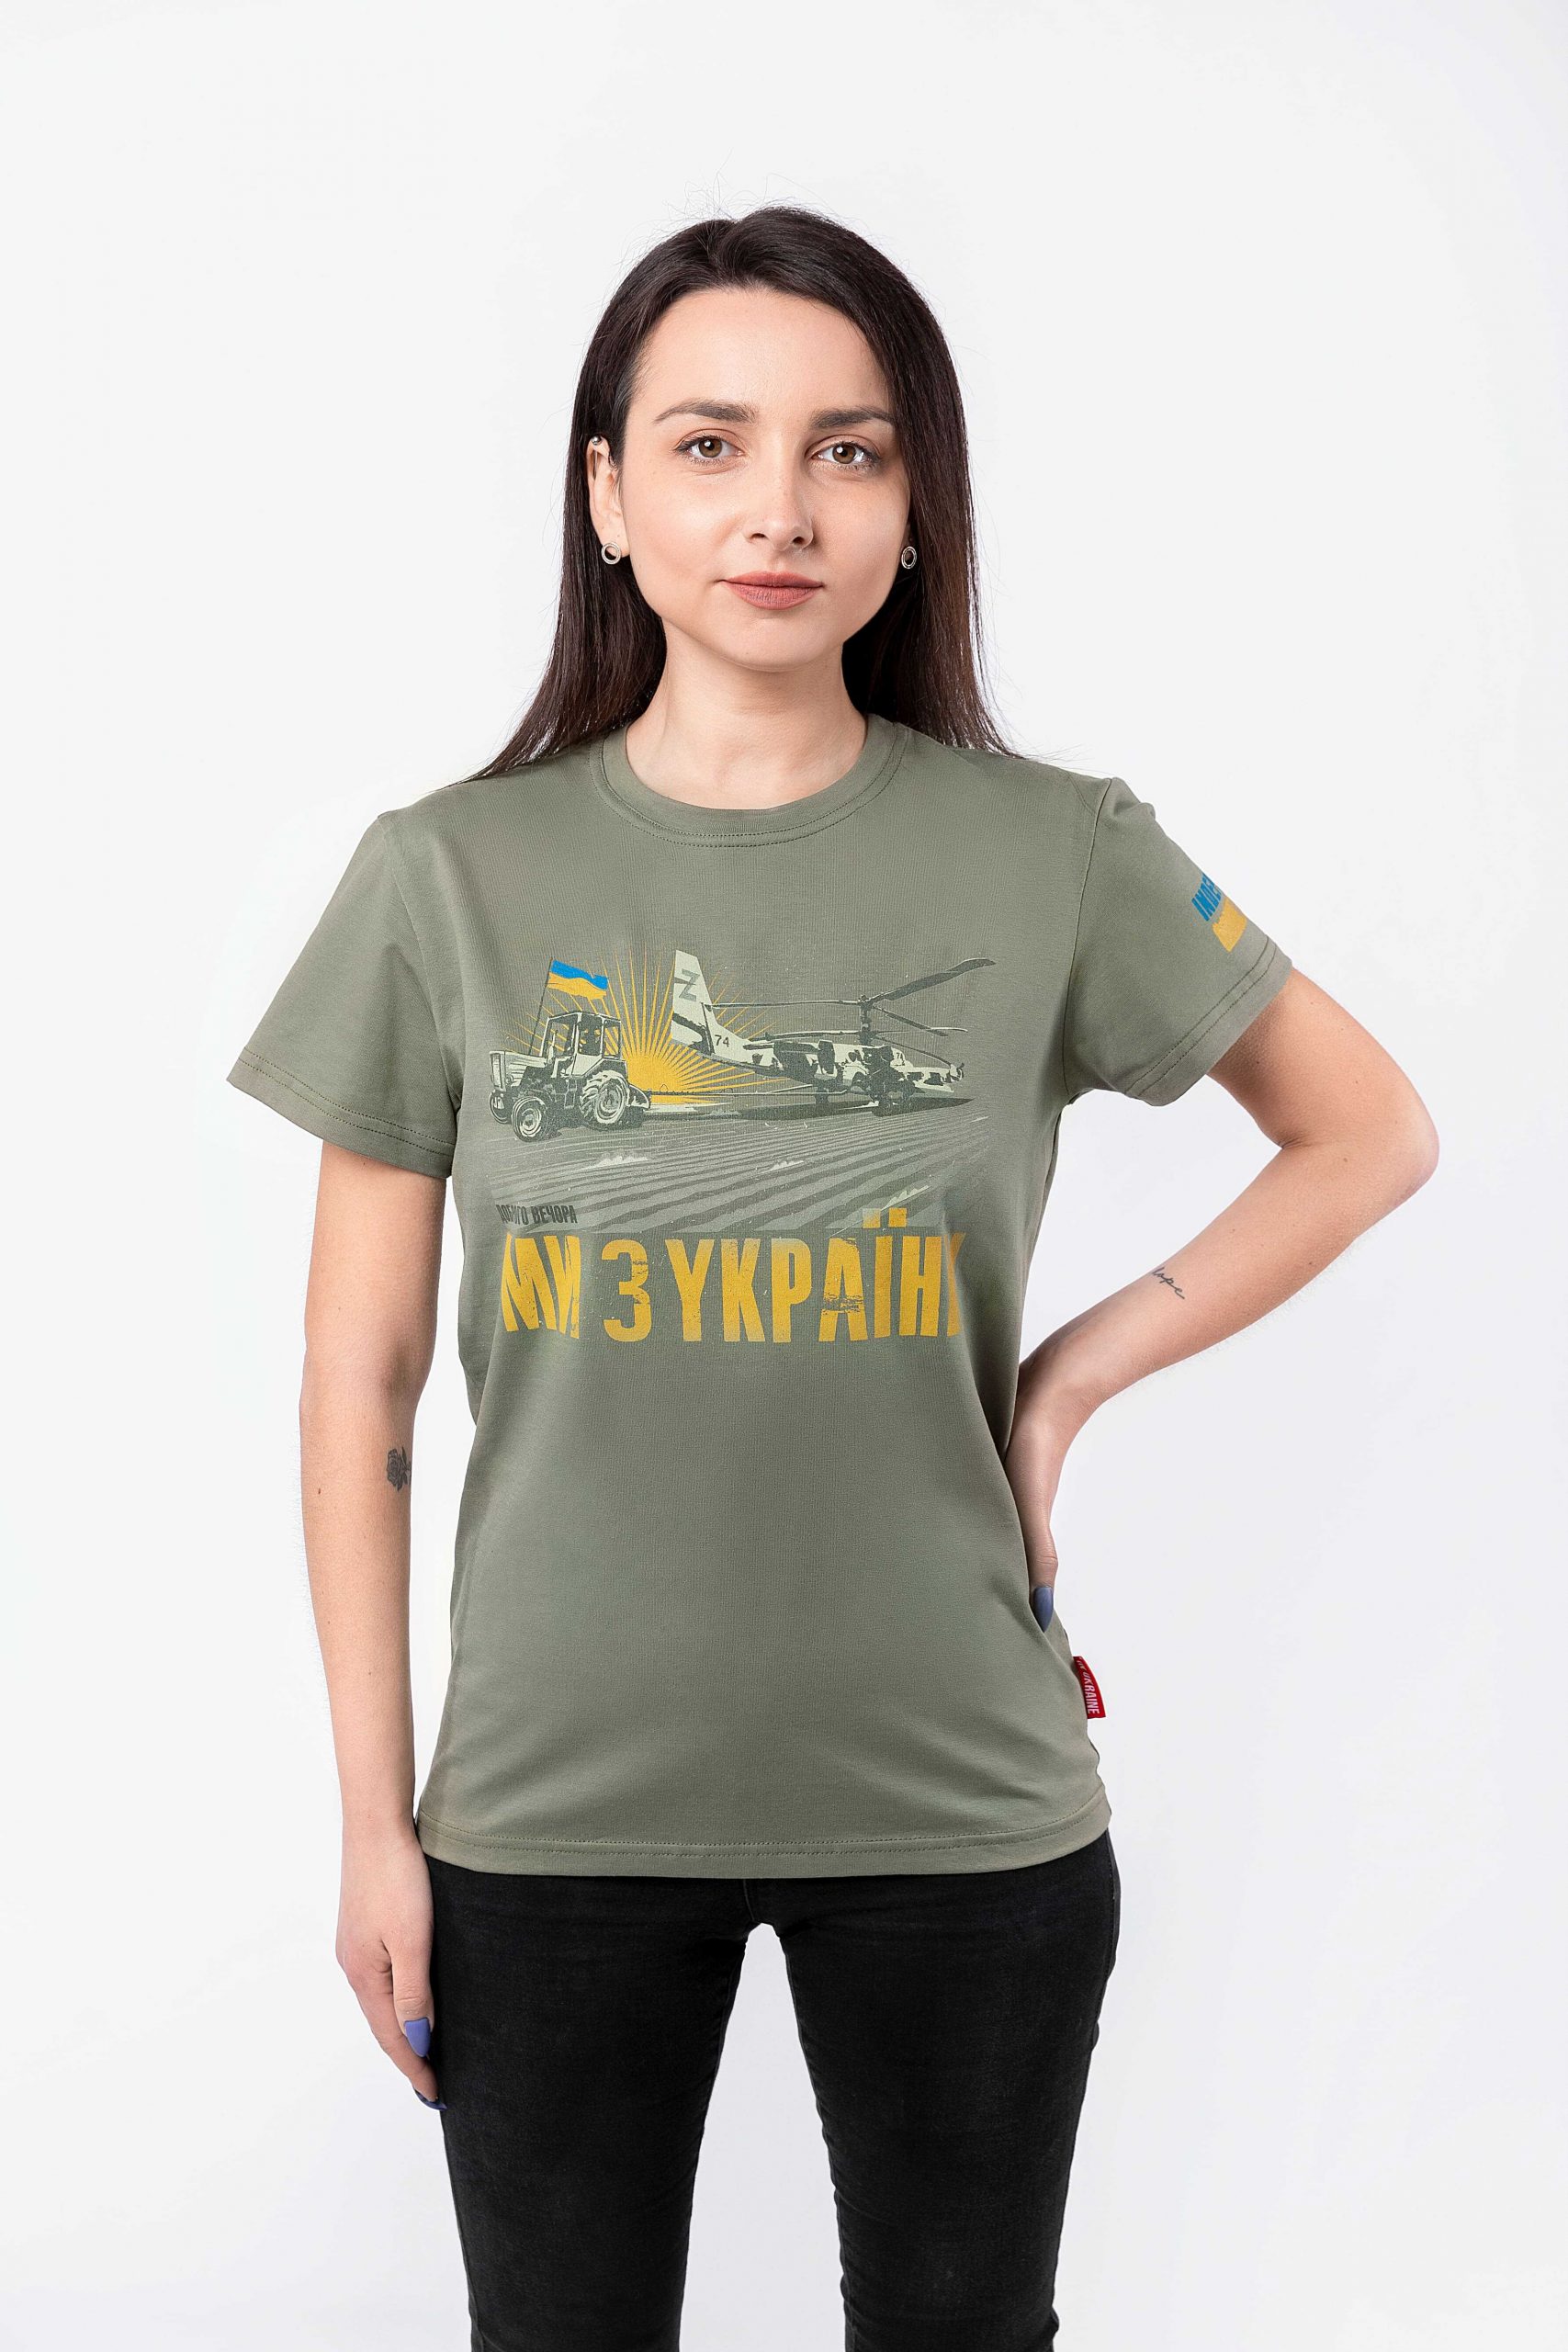 Women's T-Shirt We Are From Ukraine.h. Color khaki. .